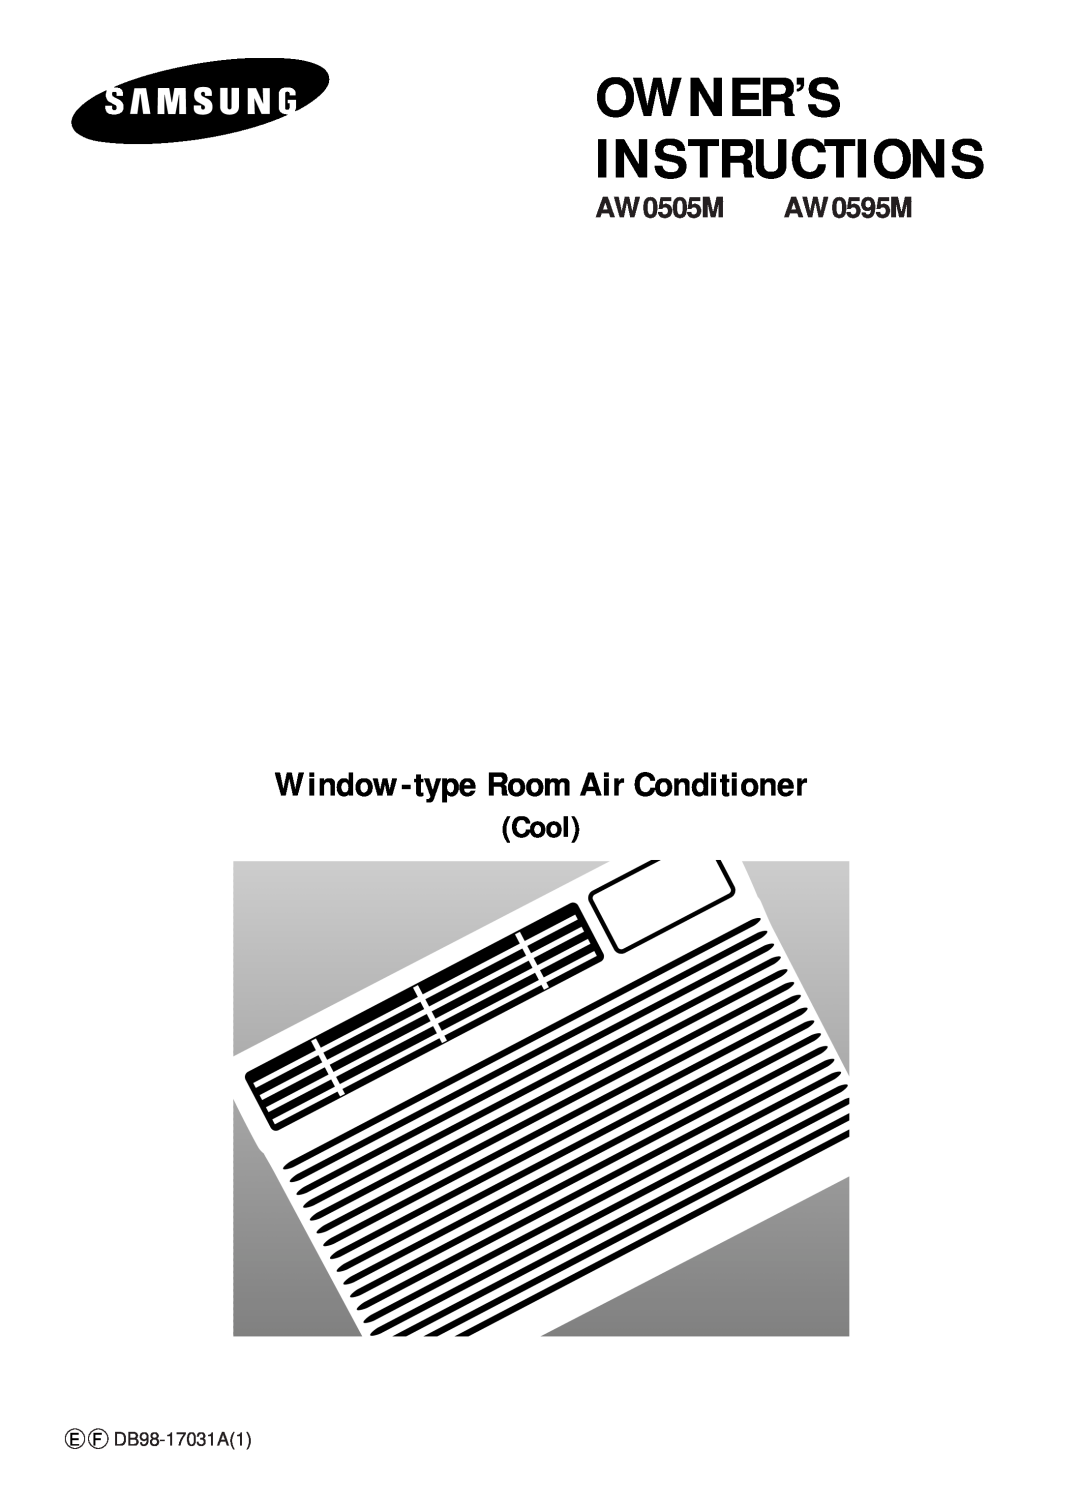 Samsung manual Owner’S Instructions, Window-typeRoom Air Conditioner, AW0505M AW0595M, Cool, E F DB98-17031A1 